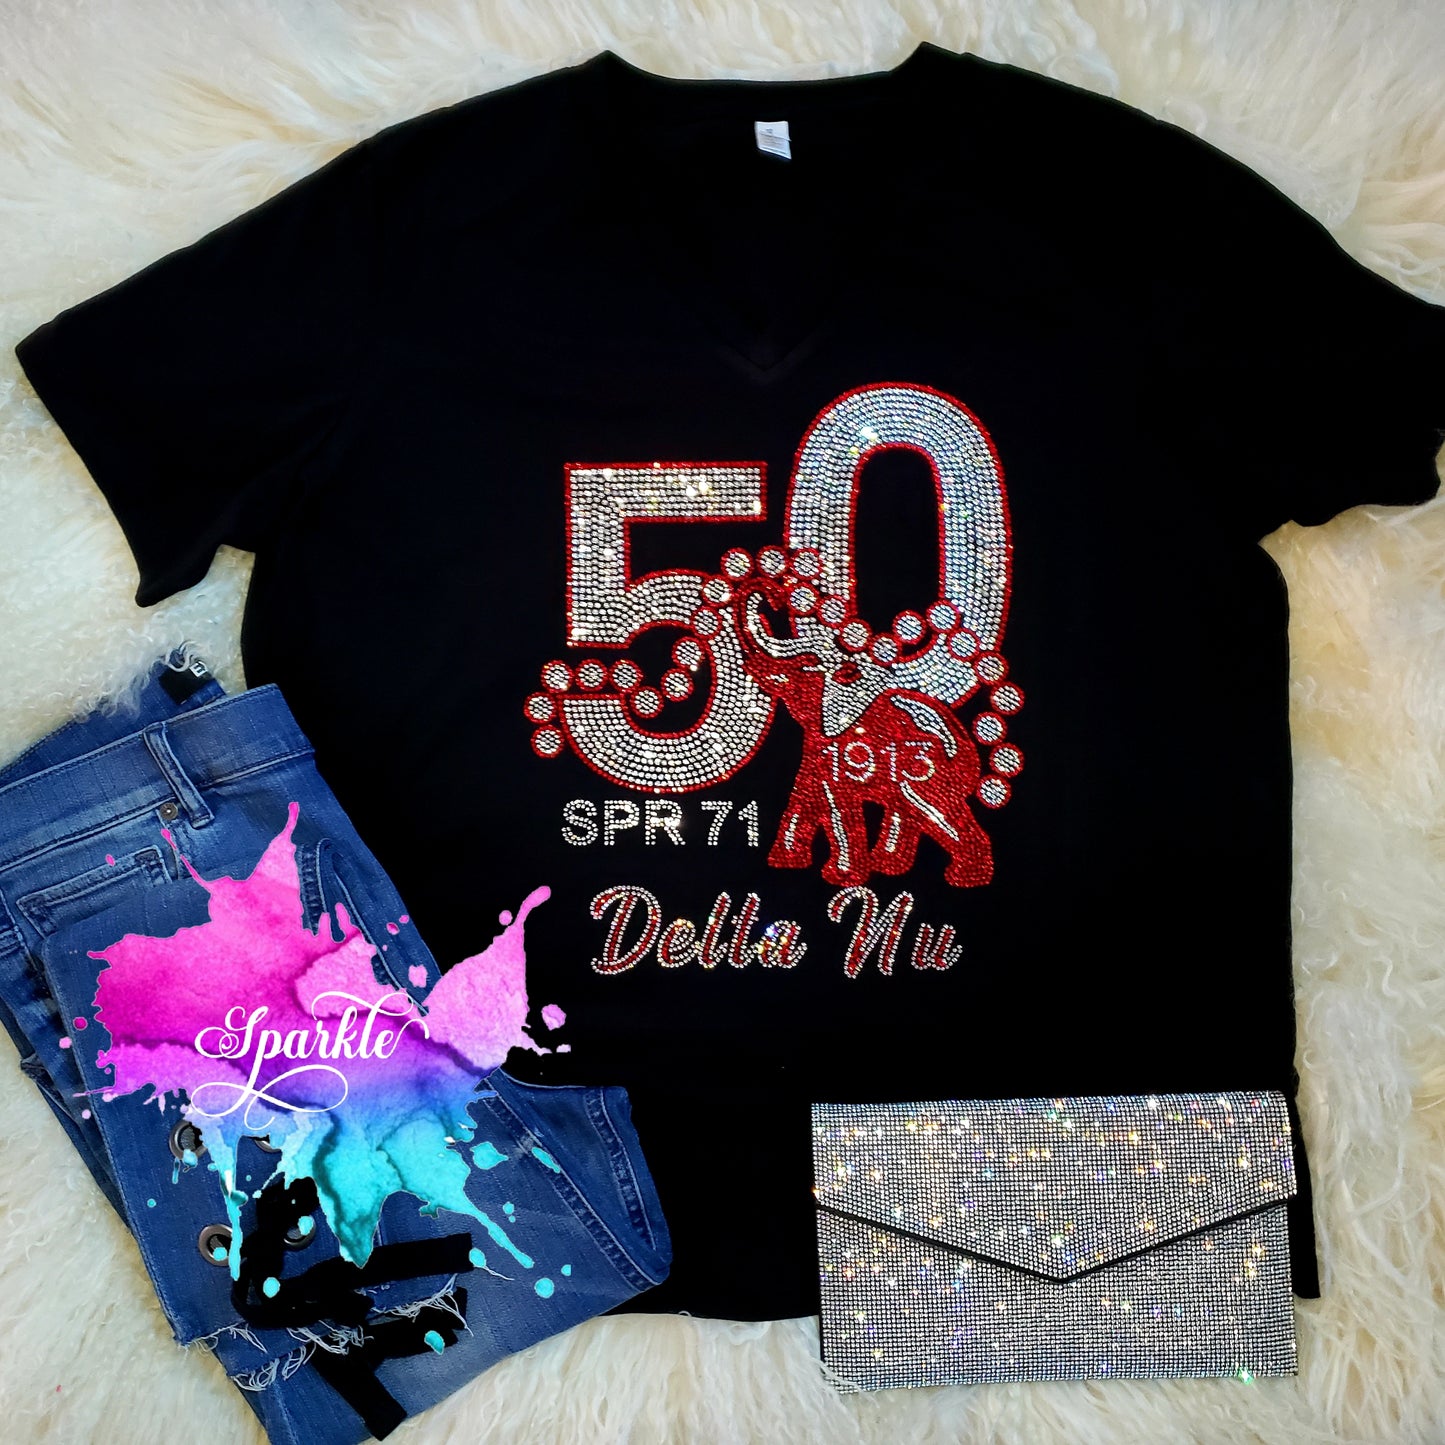 50 Years in the Dynasty Chapter Name Rhinestone Tee